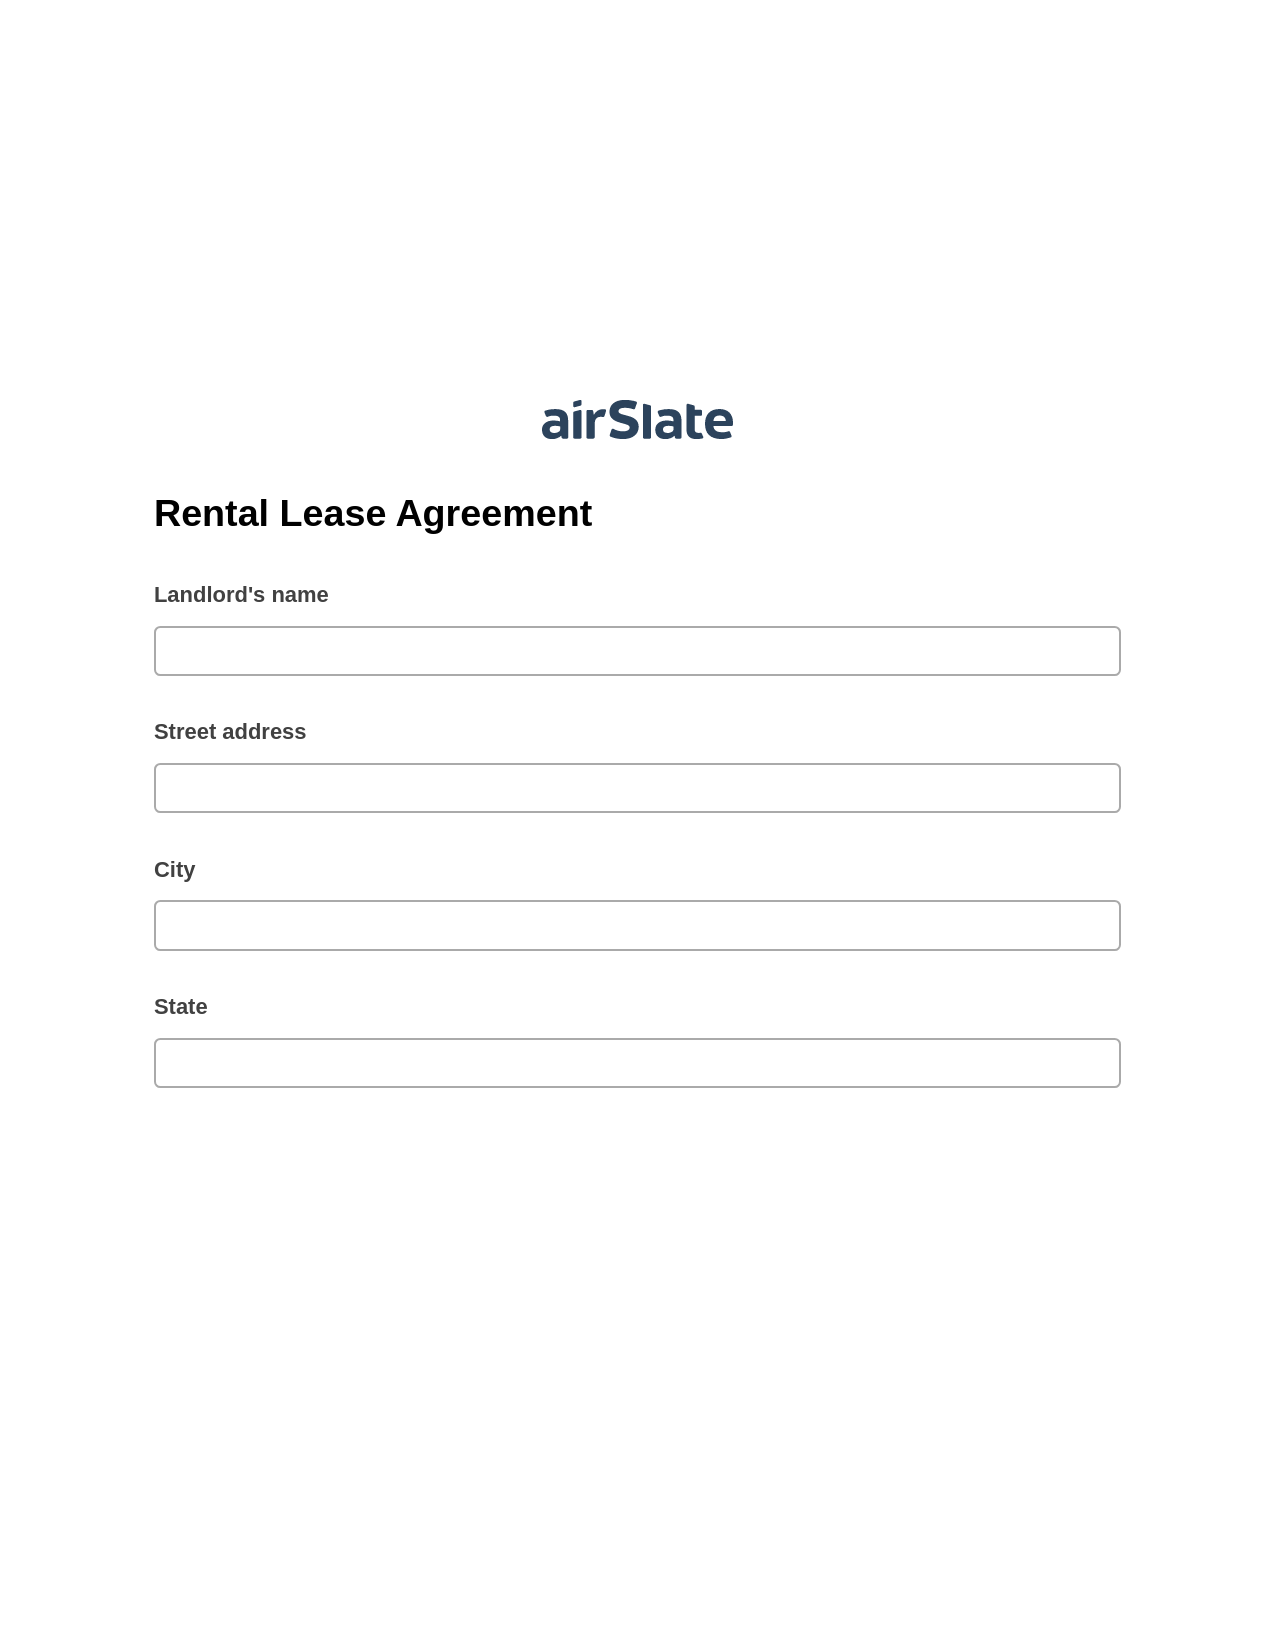 Rental Lease Agreement Pre-fill Slate from MS Dynamics 365 Records Bot, Remove Tags From Slate Bot, Export to Formstack Documents Bot